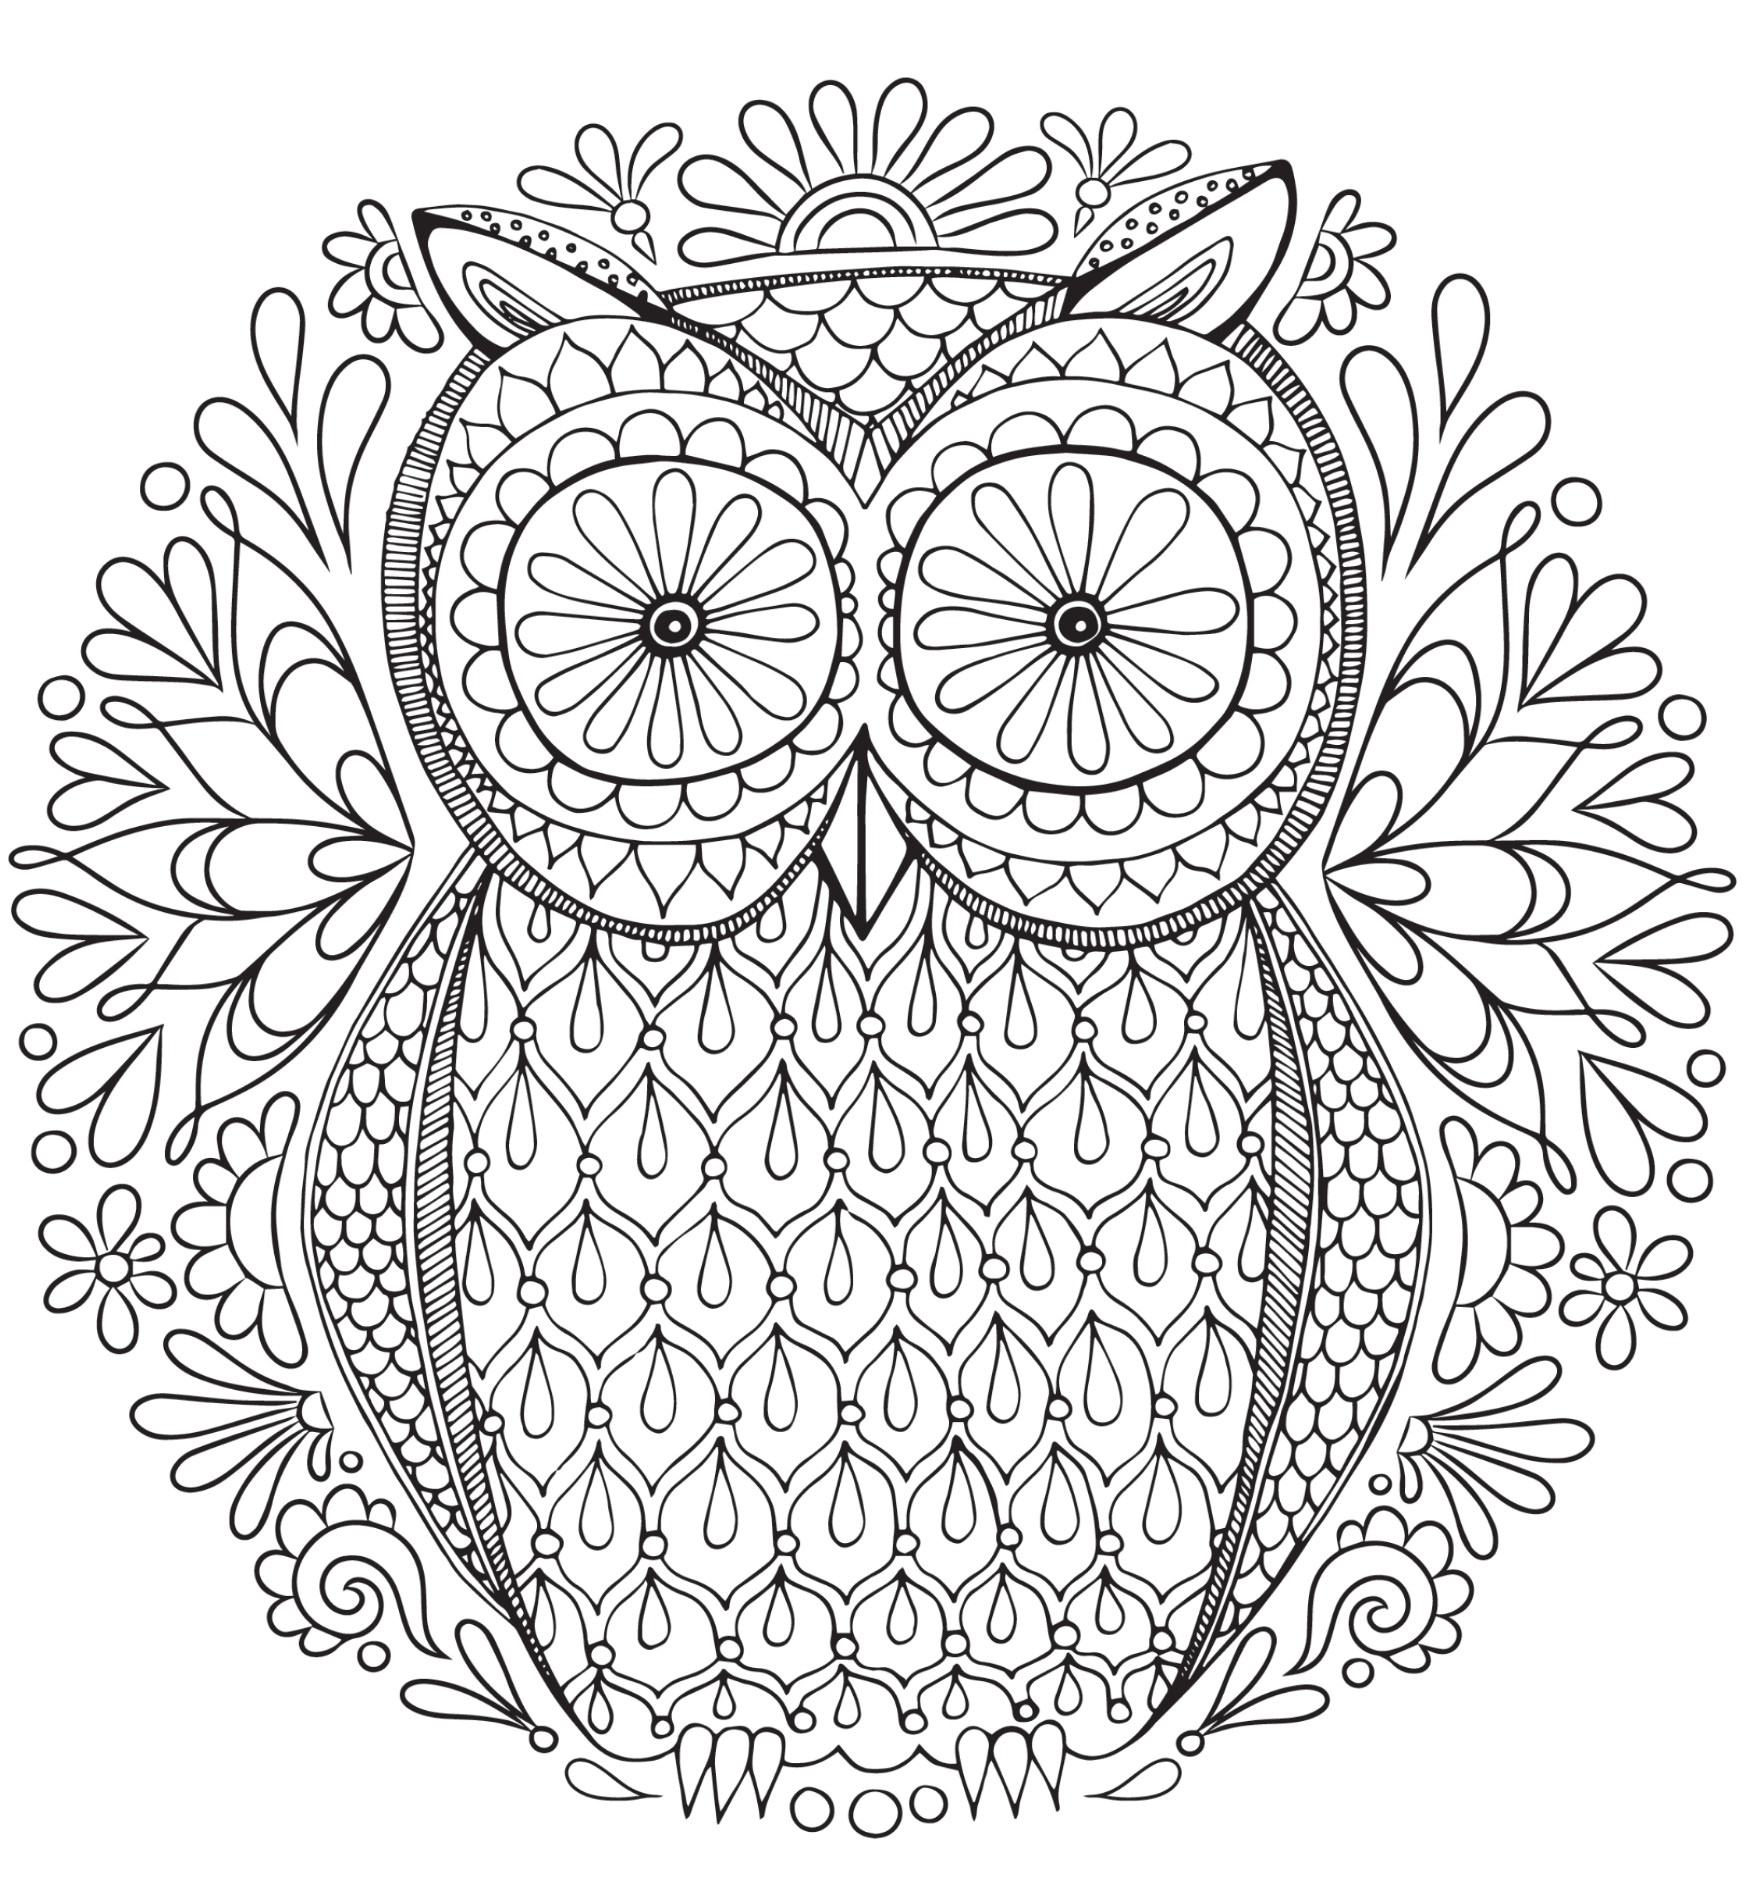 Coloring Pages Adults
 20 Free Adult Colouring Pages The Organised Housewife